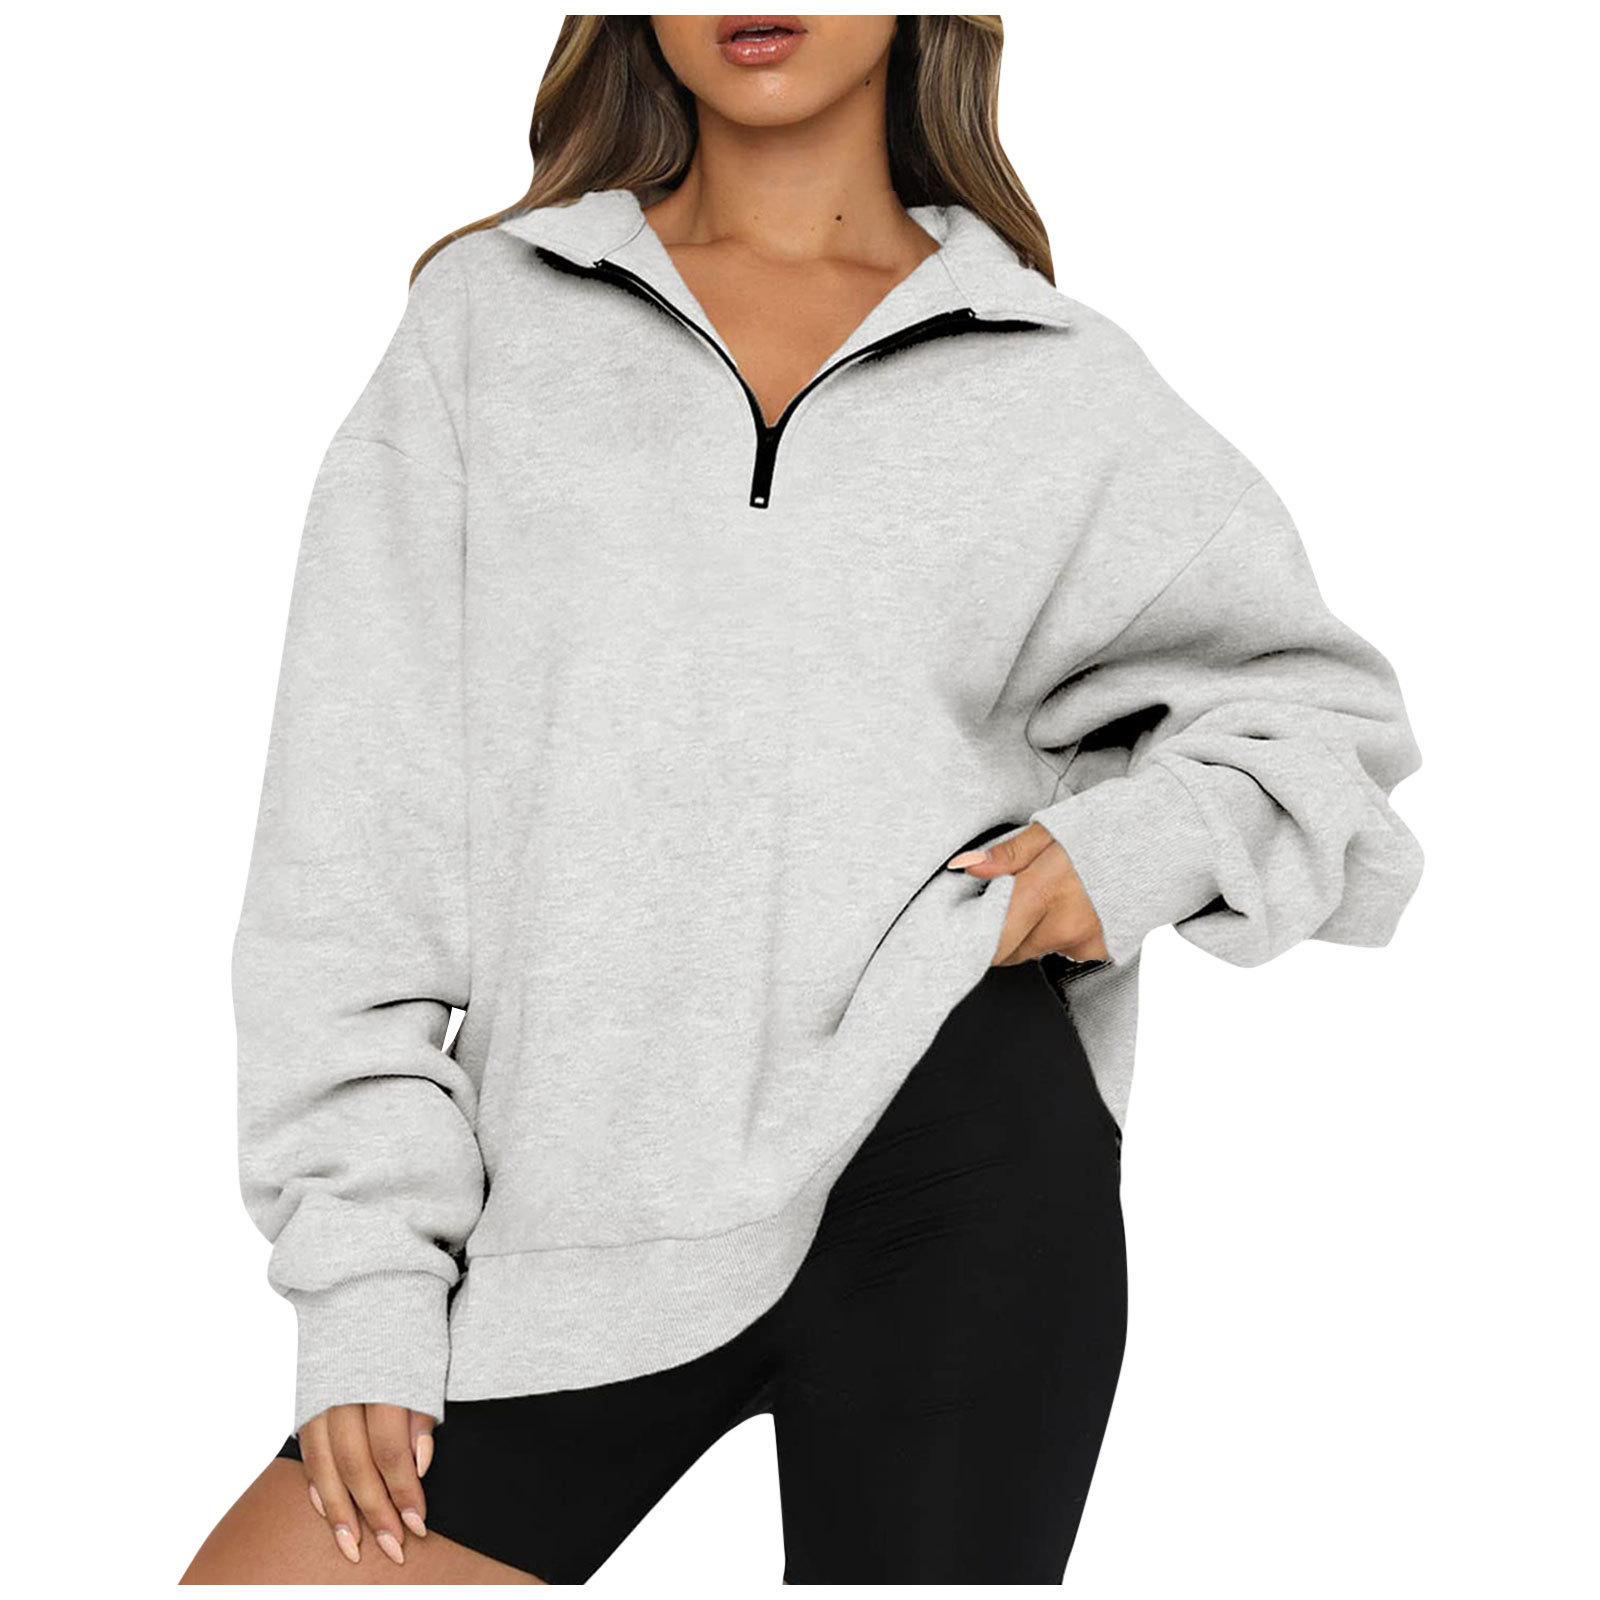 European and American Women's Clothing 2022 Autumn and Winter New Amazon Casual Top Half Zipper Pullover Long Sleeve Sweatshirt Sweater for Women